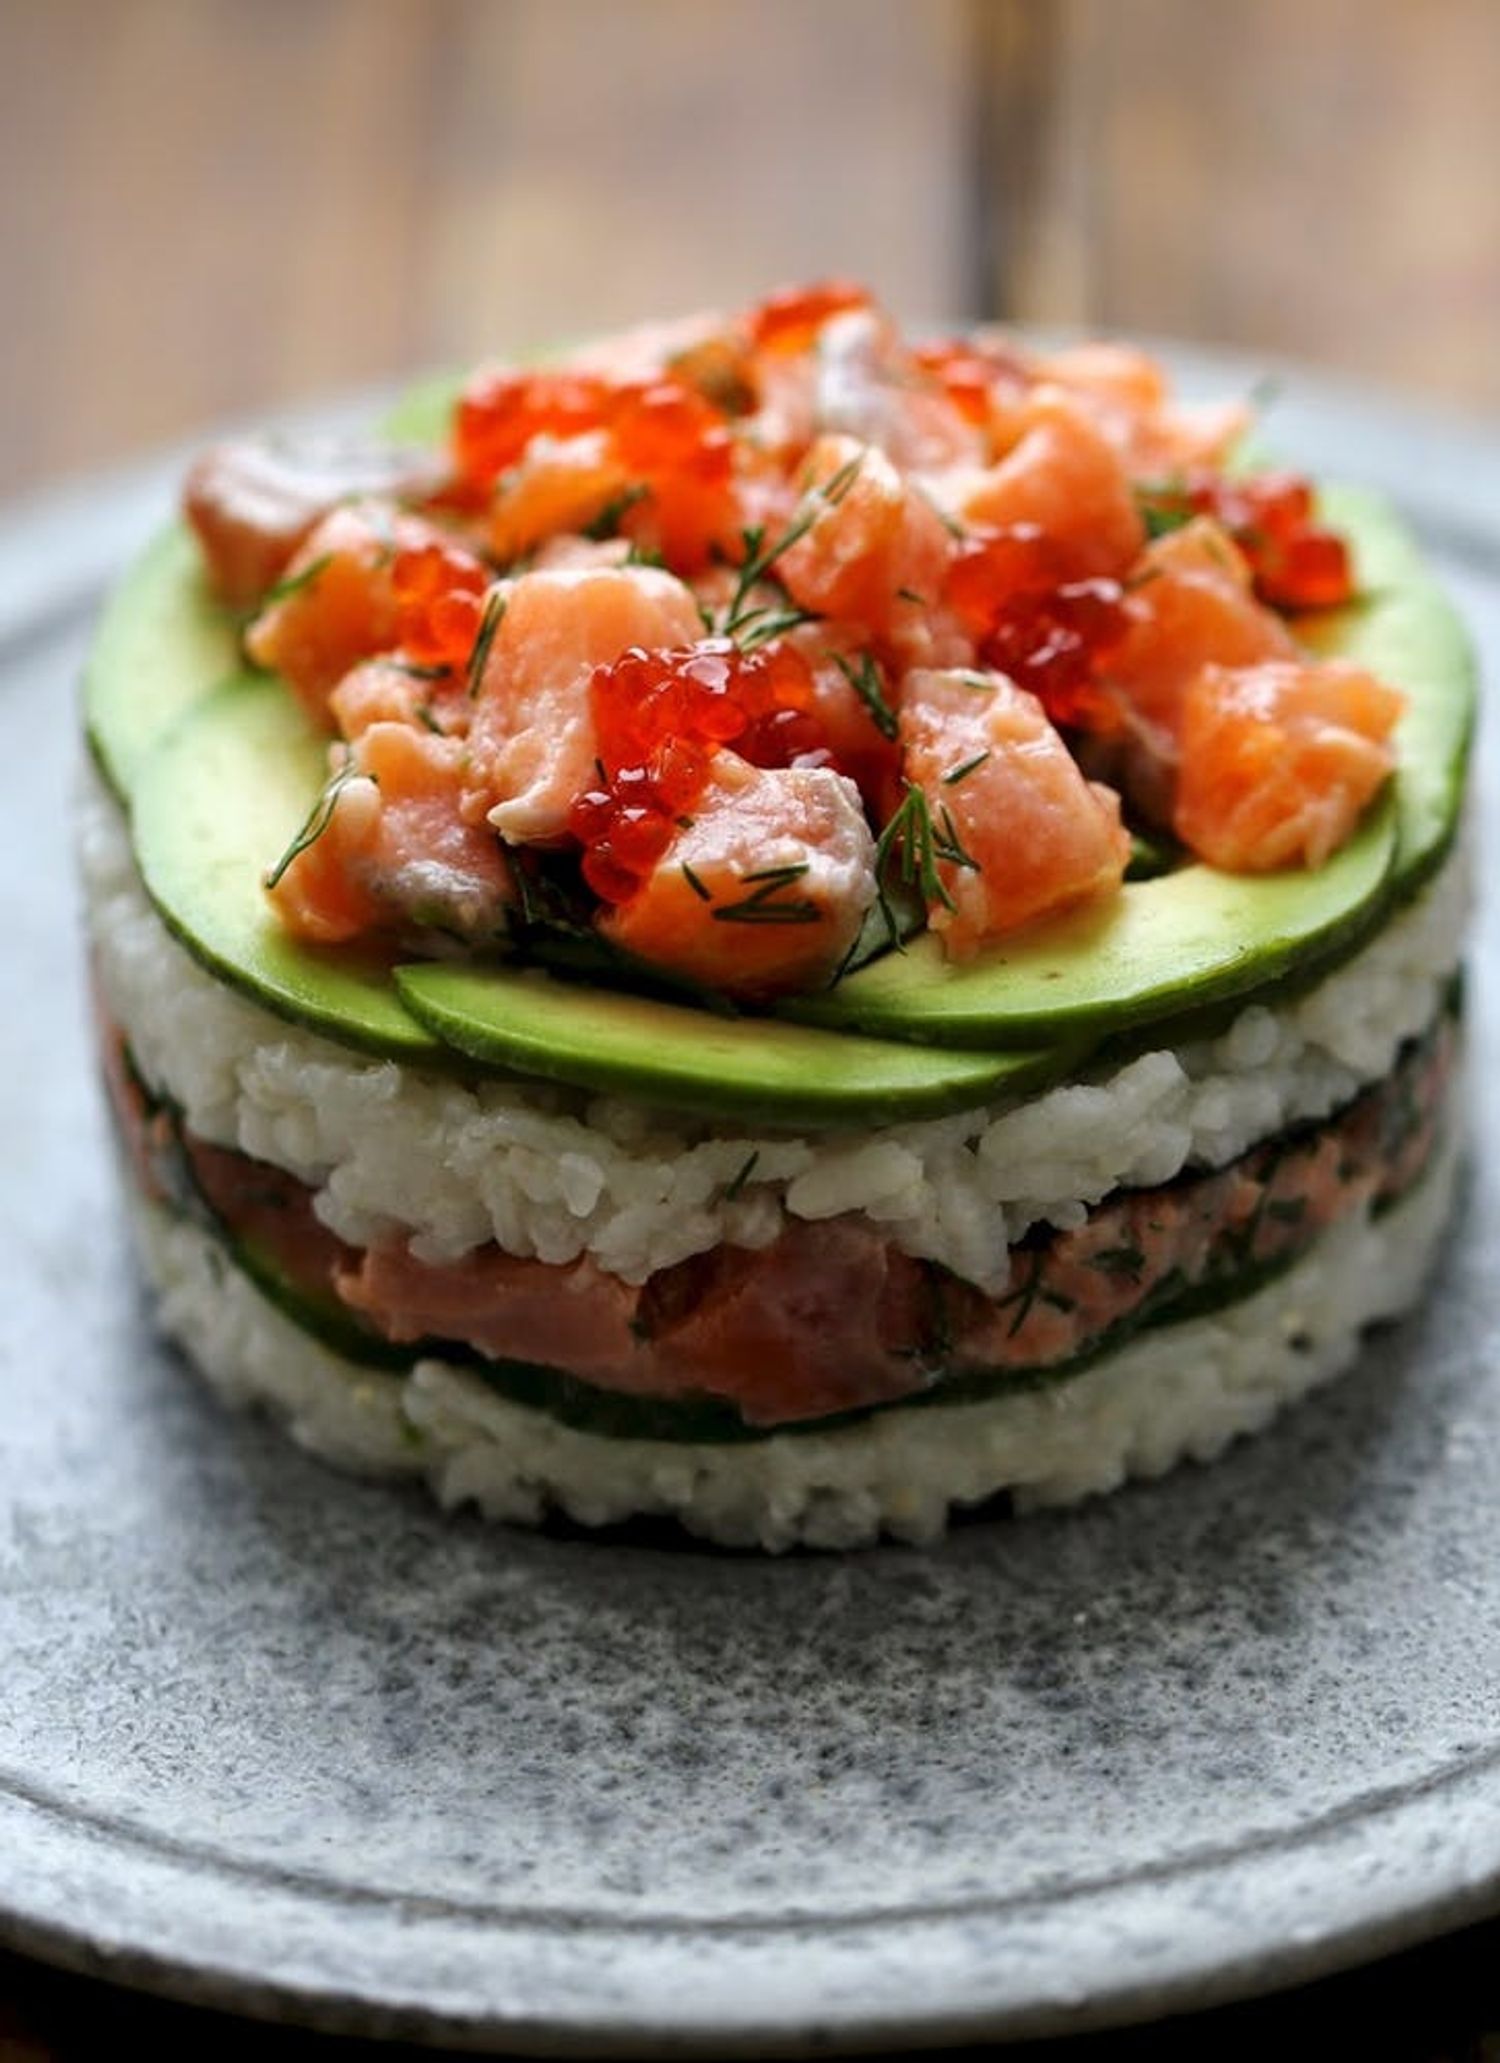 Sushi Cakes Are the Newest Crazy Food Fad - Brit + Co